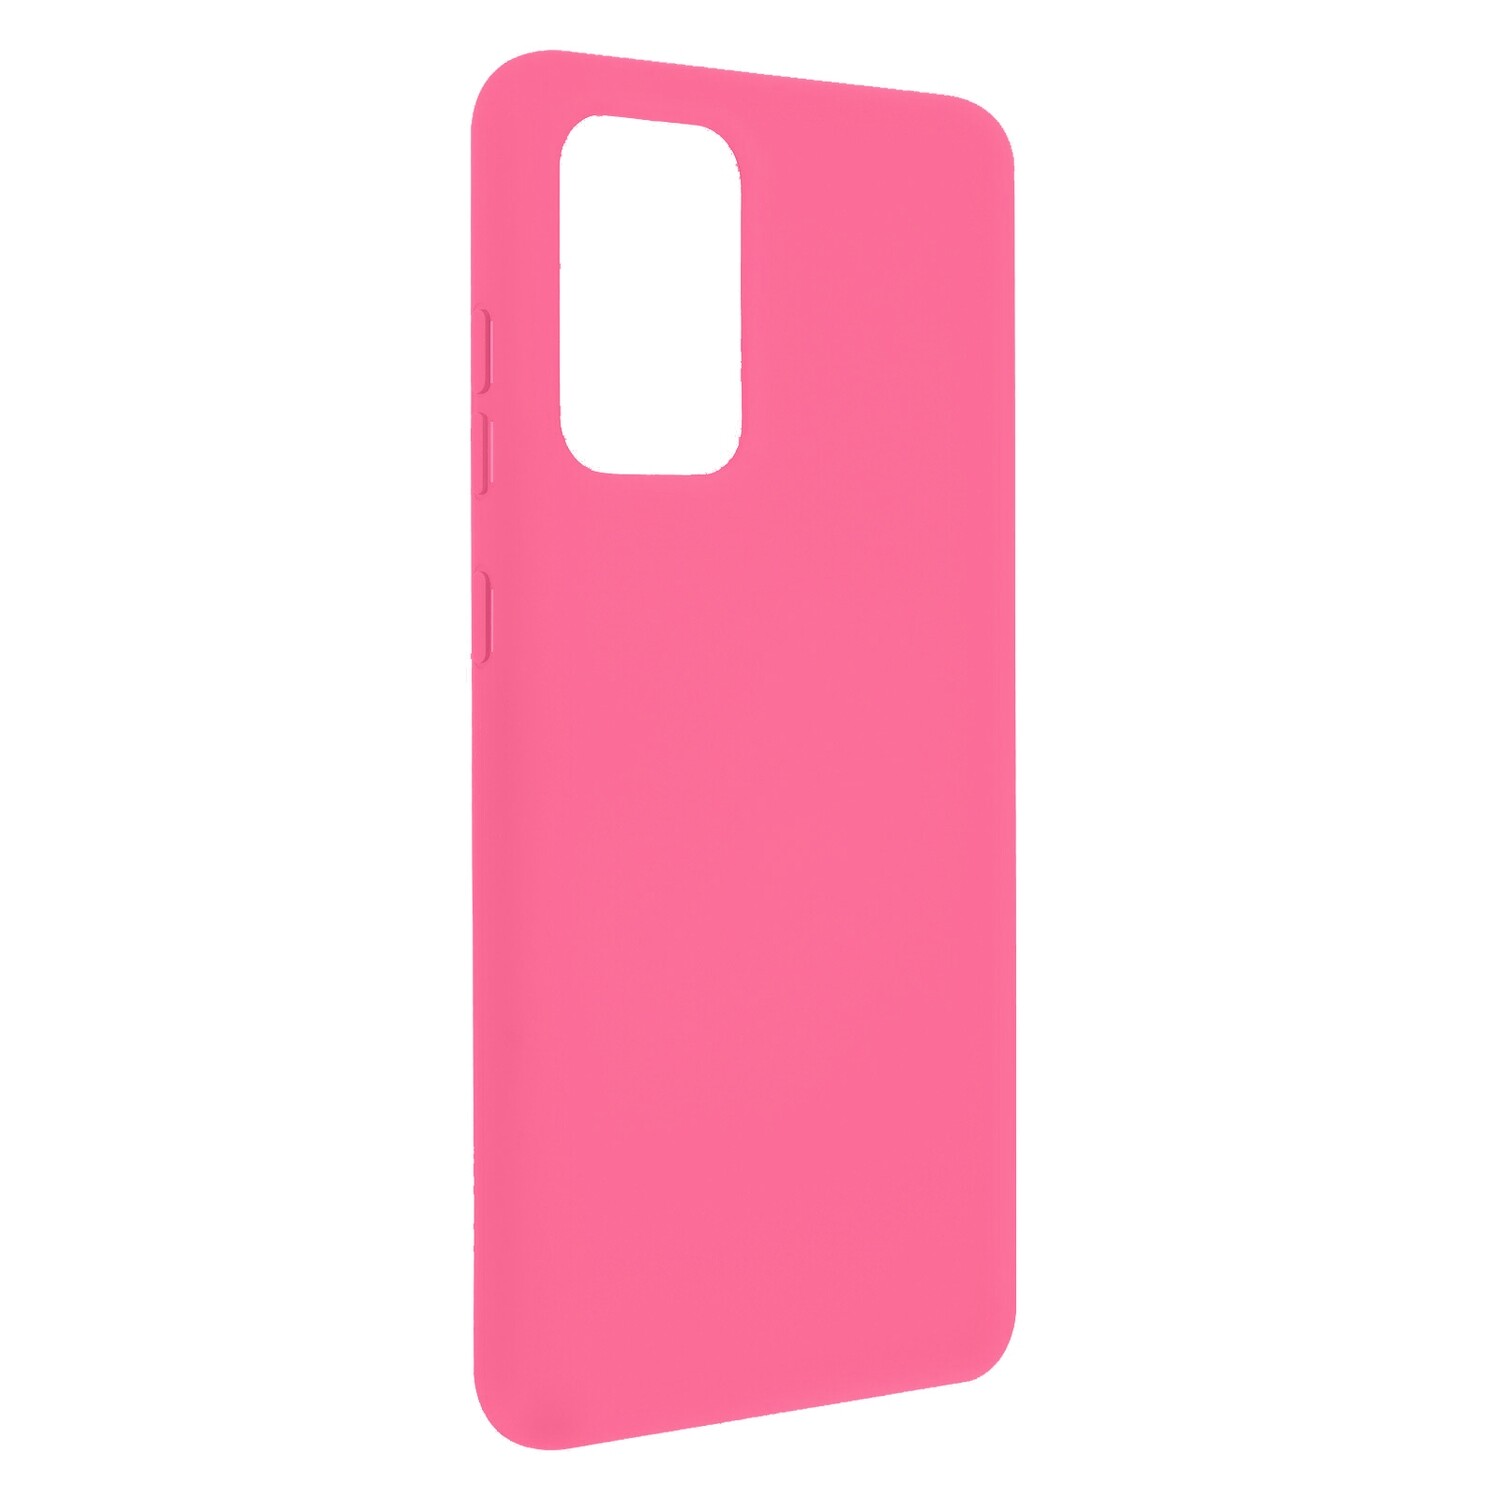 Samsung: cover soft touch pink